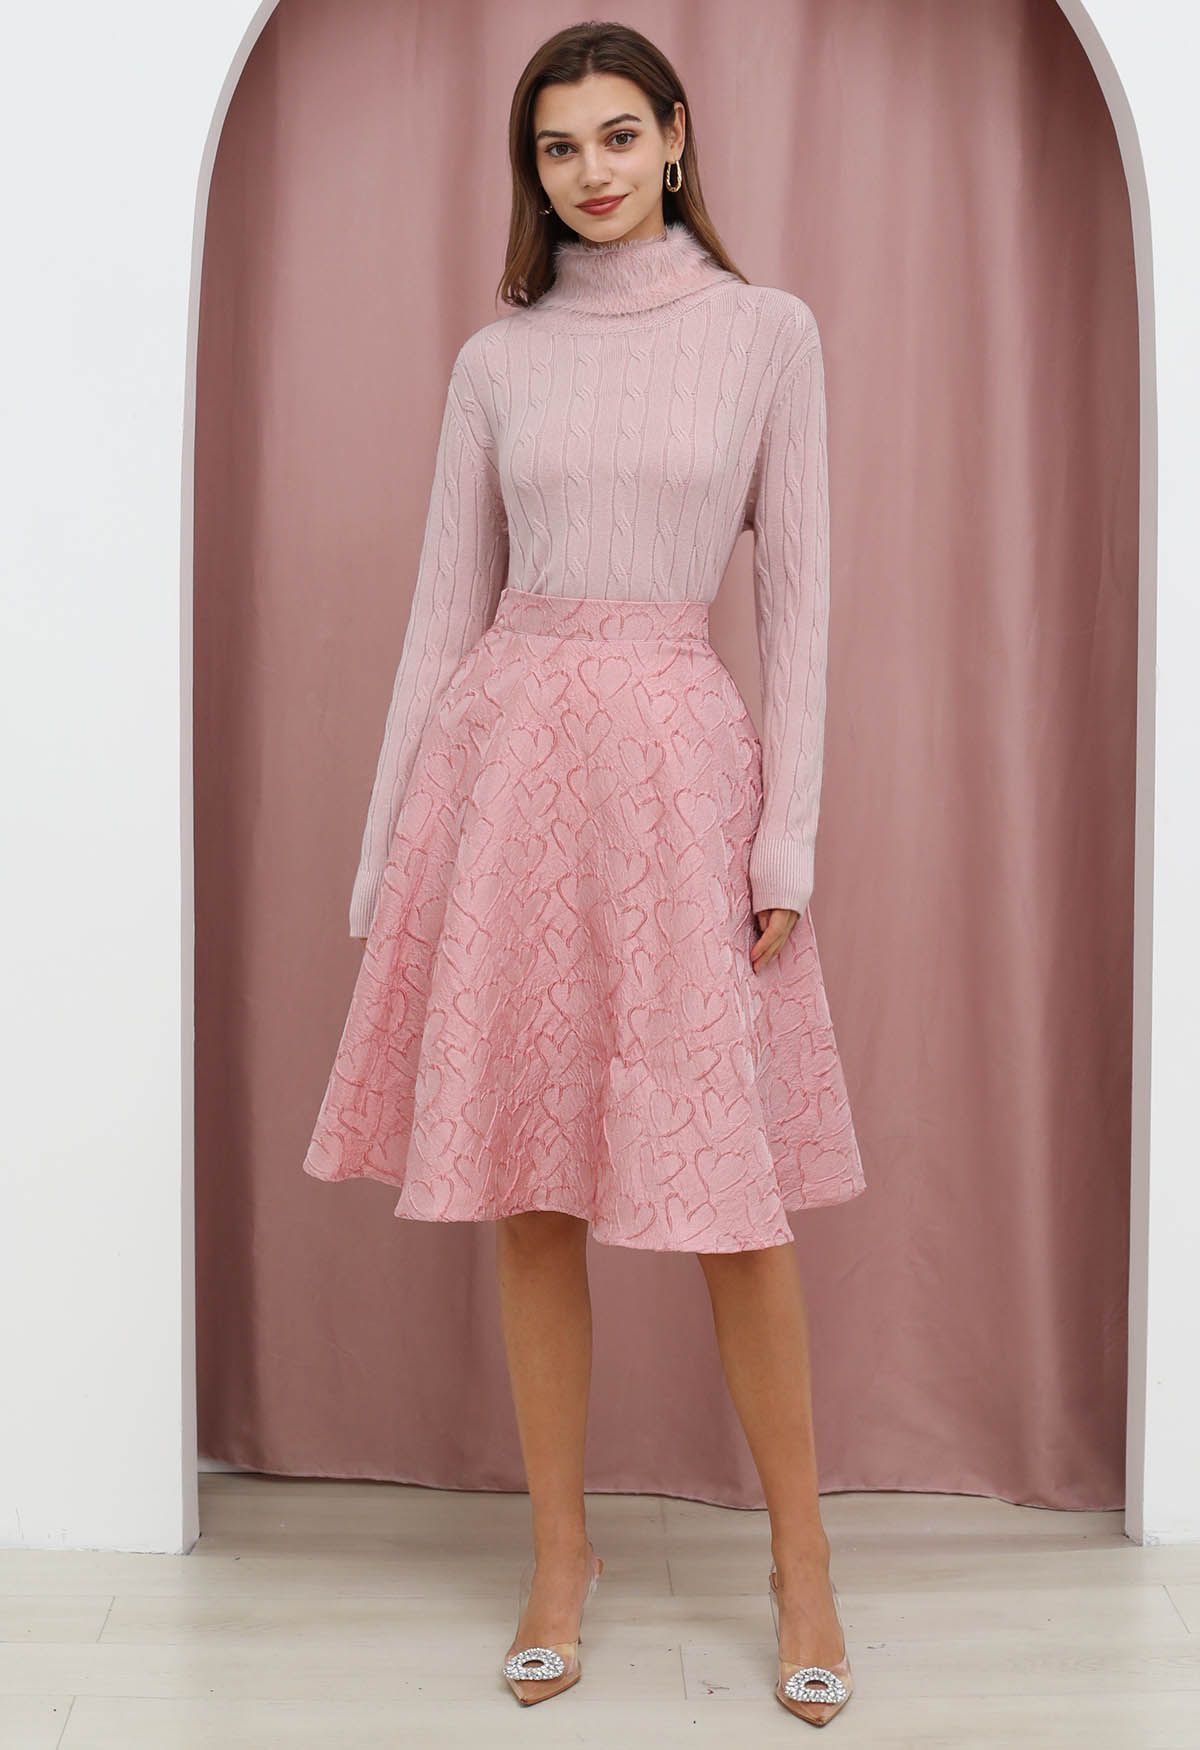 Pastel Heart Texture Flare Skirt in Pink